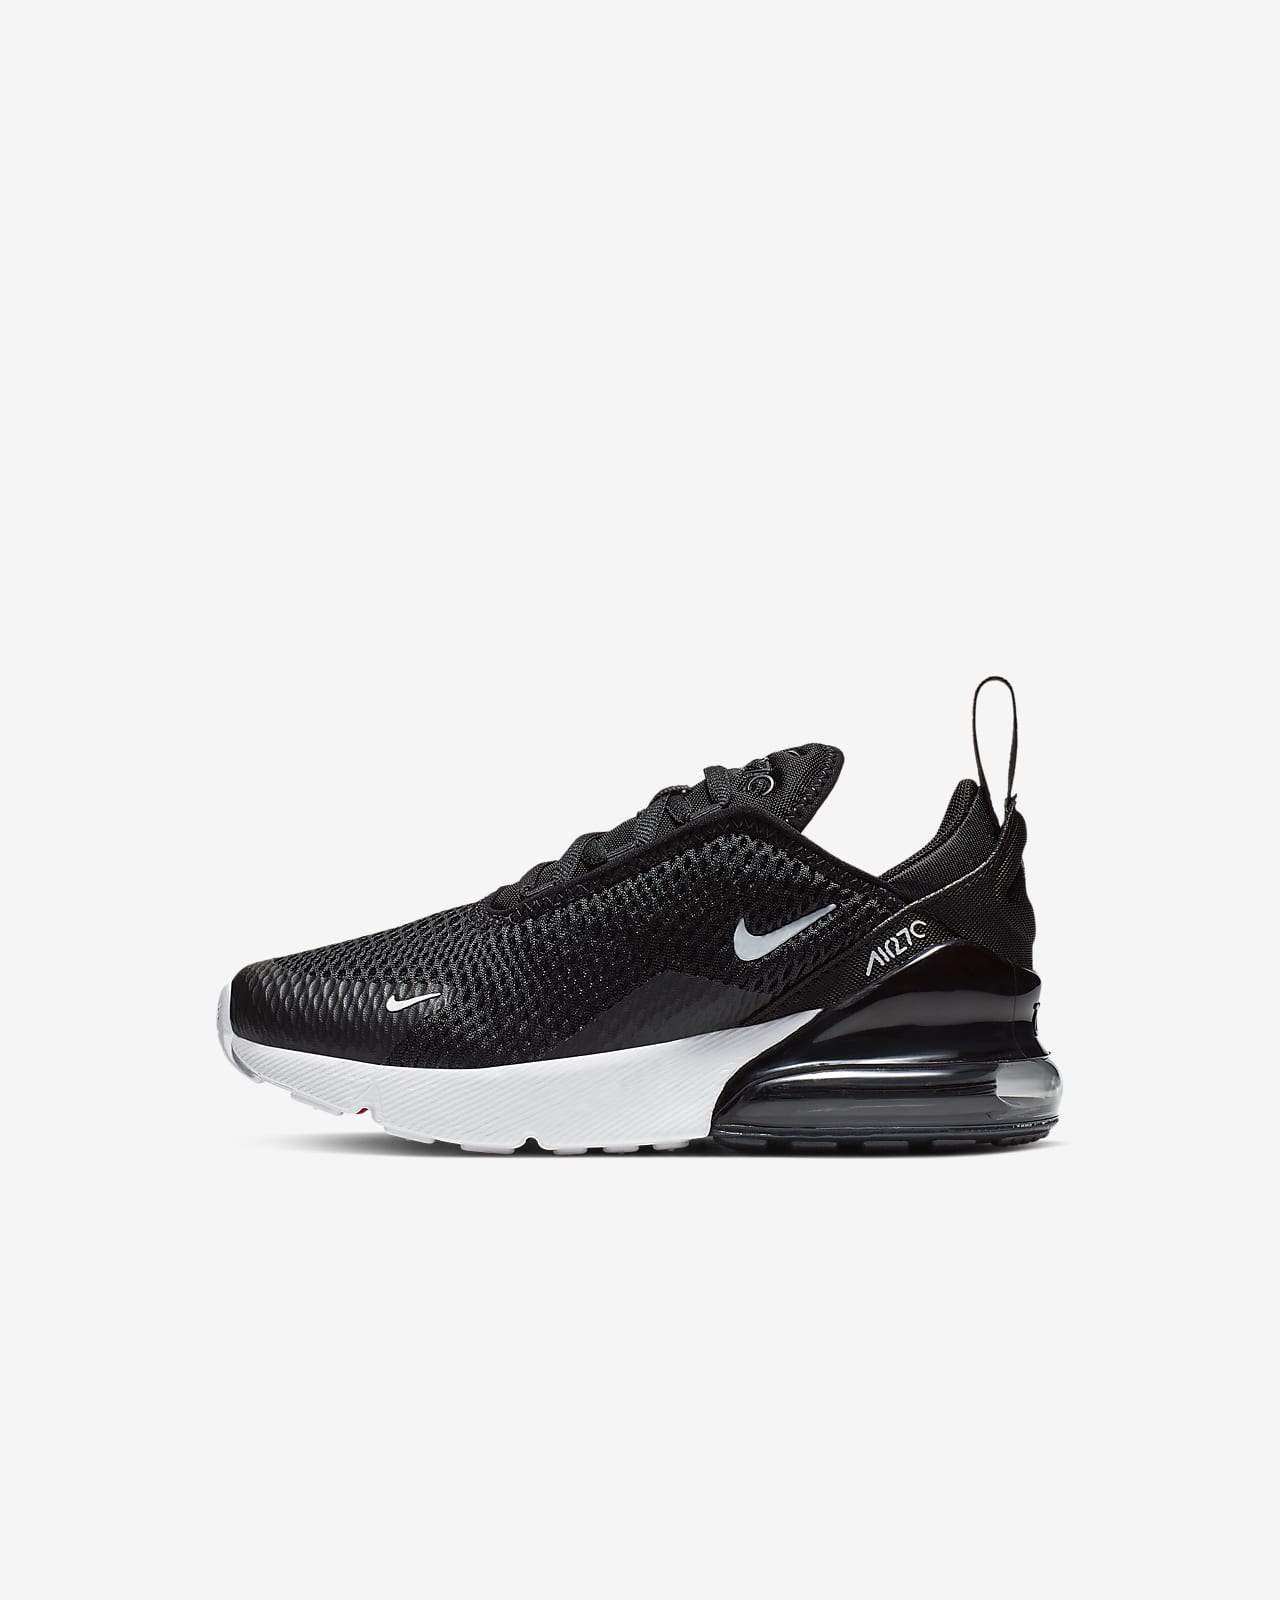 nike air max 270 black and white size 6